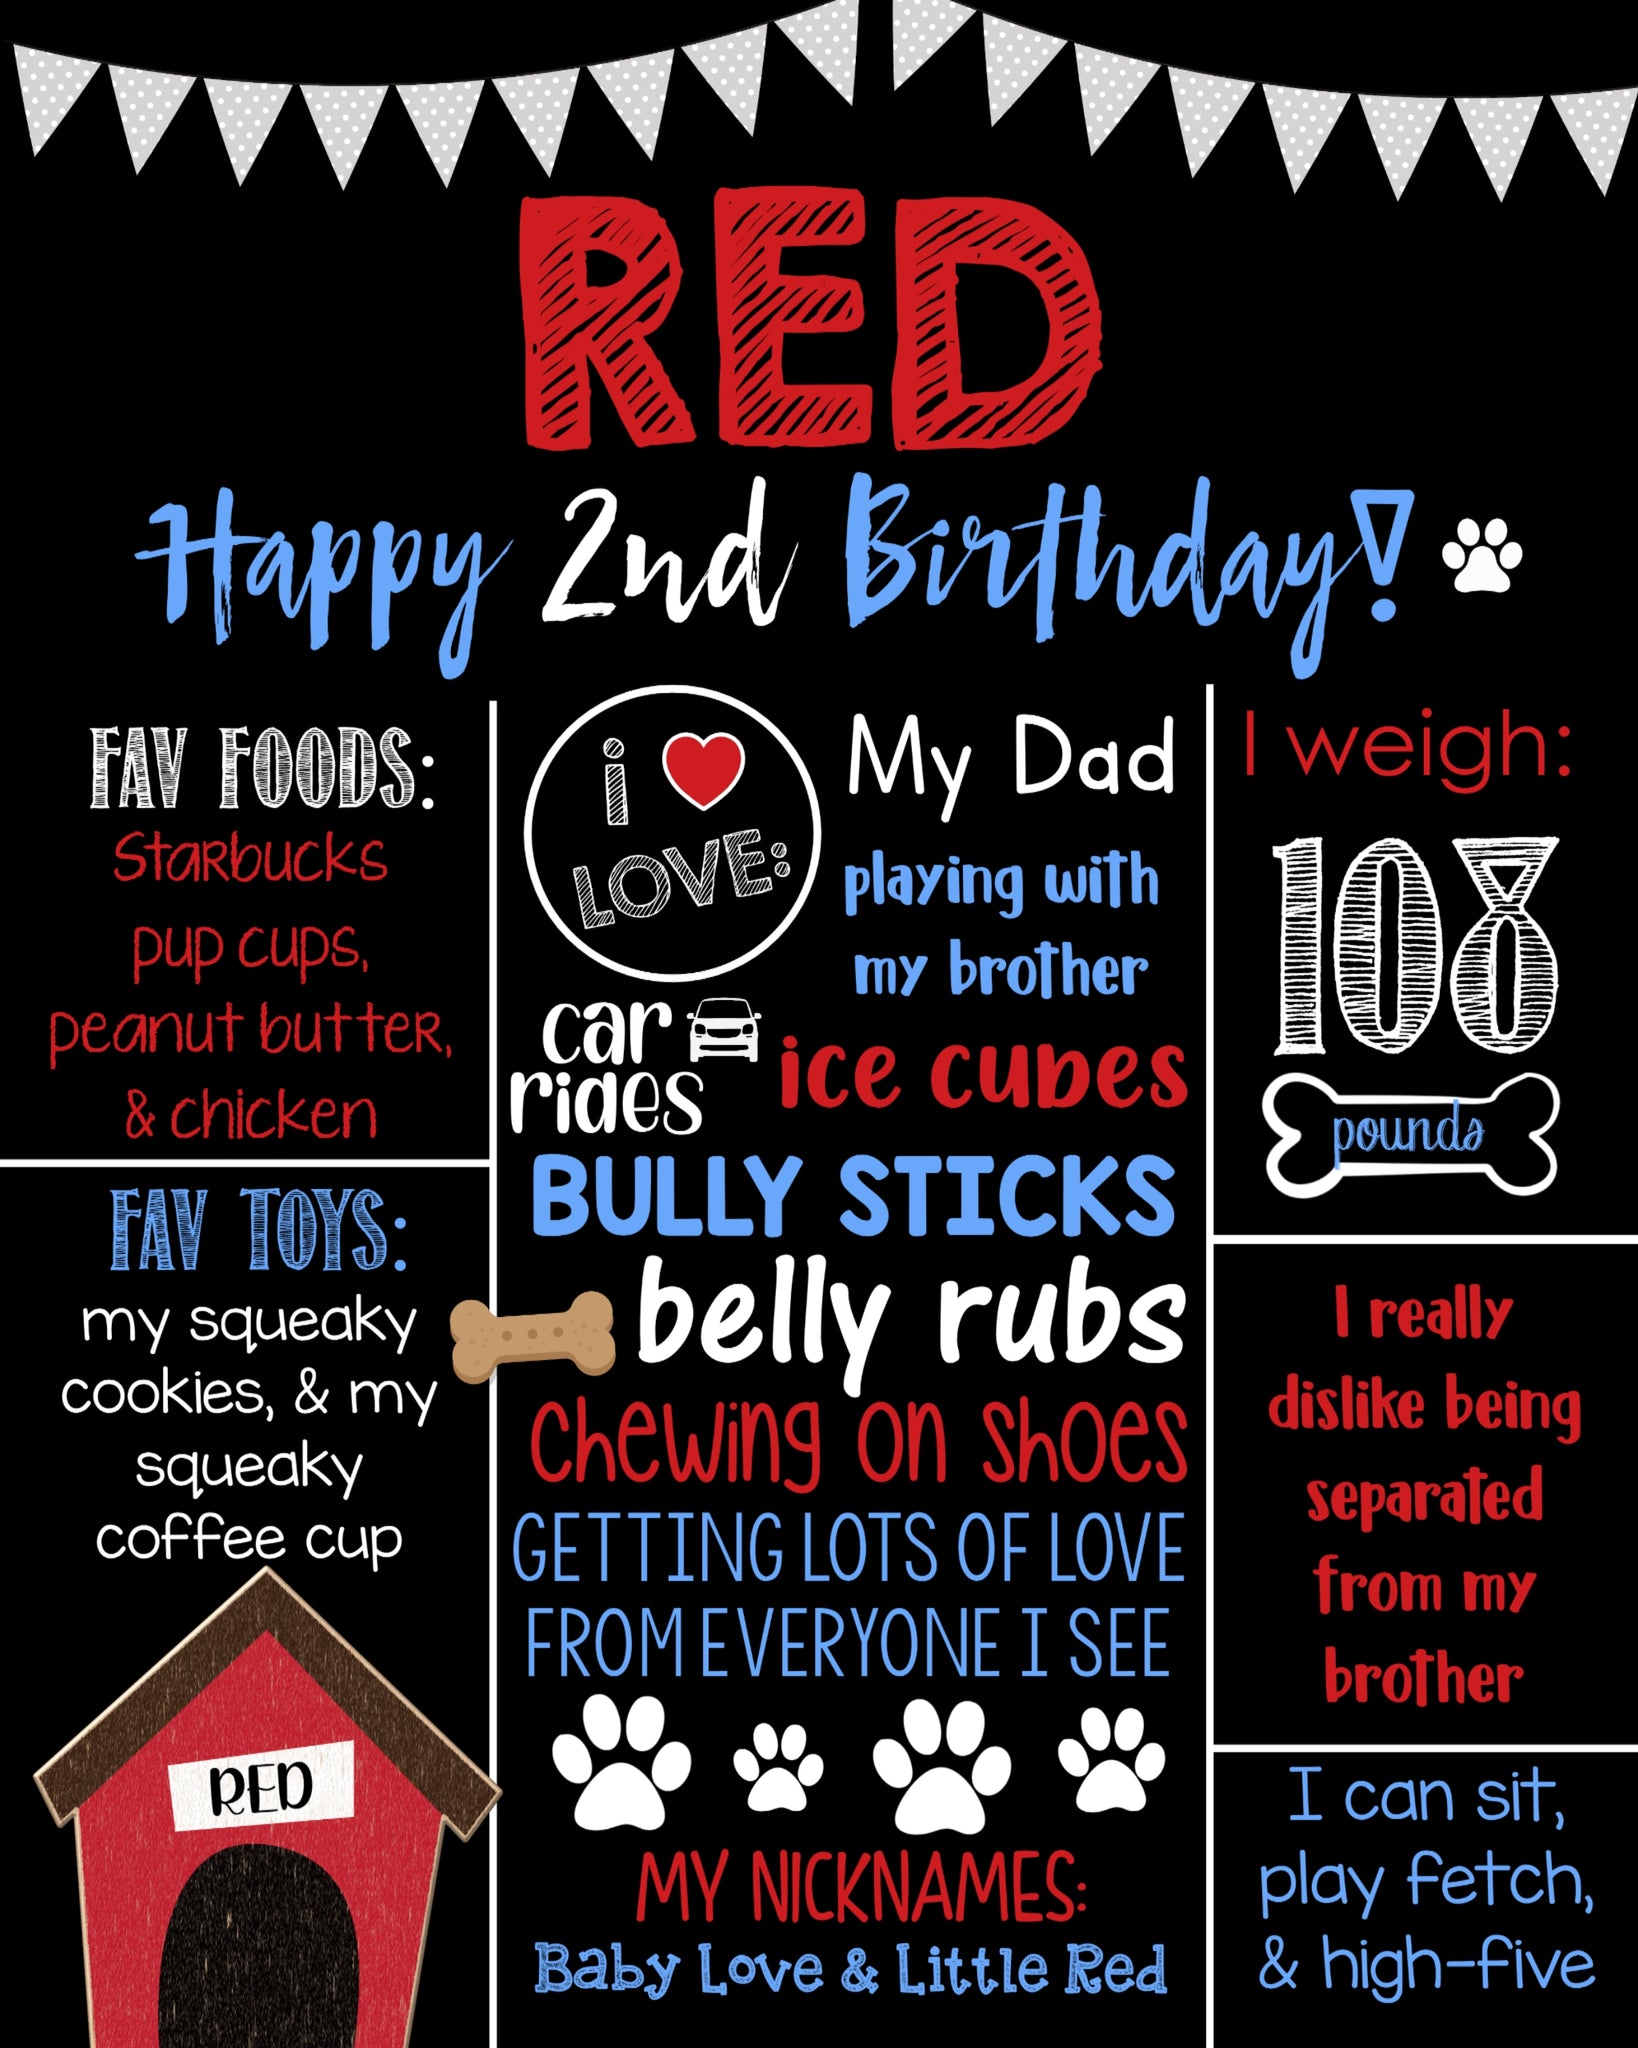 Red, White, and Blue Dog Birthday Board